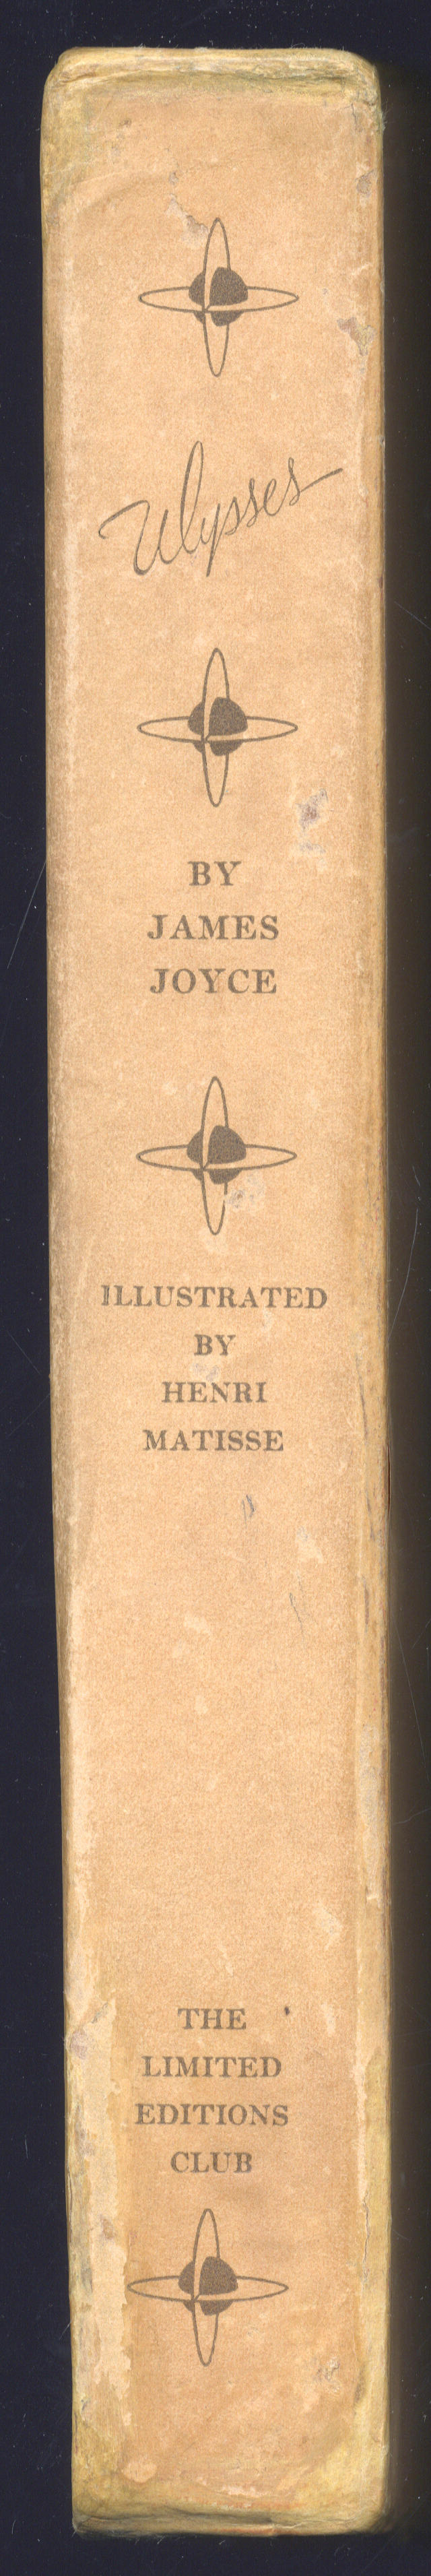 JOYCE (JAMES) AND HENRI MATISSE  Ulysses... with an Introduction by Stuart Gilbert and Illustrations by Henri Matisse, ONE OF 250 COPIES SIGNED BY BOTH AUTHOR AND ARTIS, FROM AN EDITION LIMITED TO 1500 COPIES,  New York, Limited Editions Club, 1935